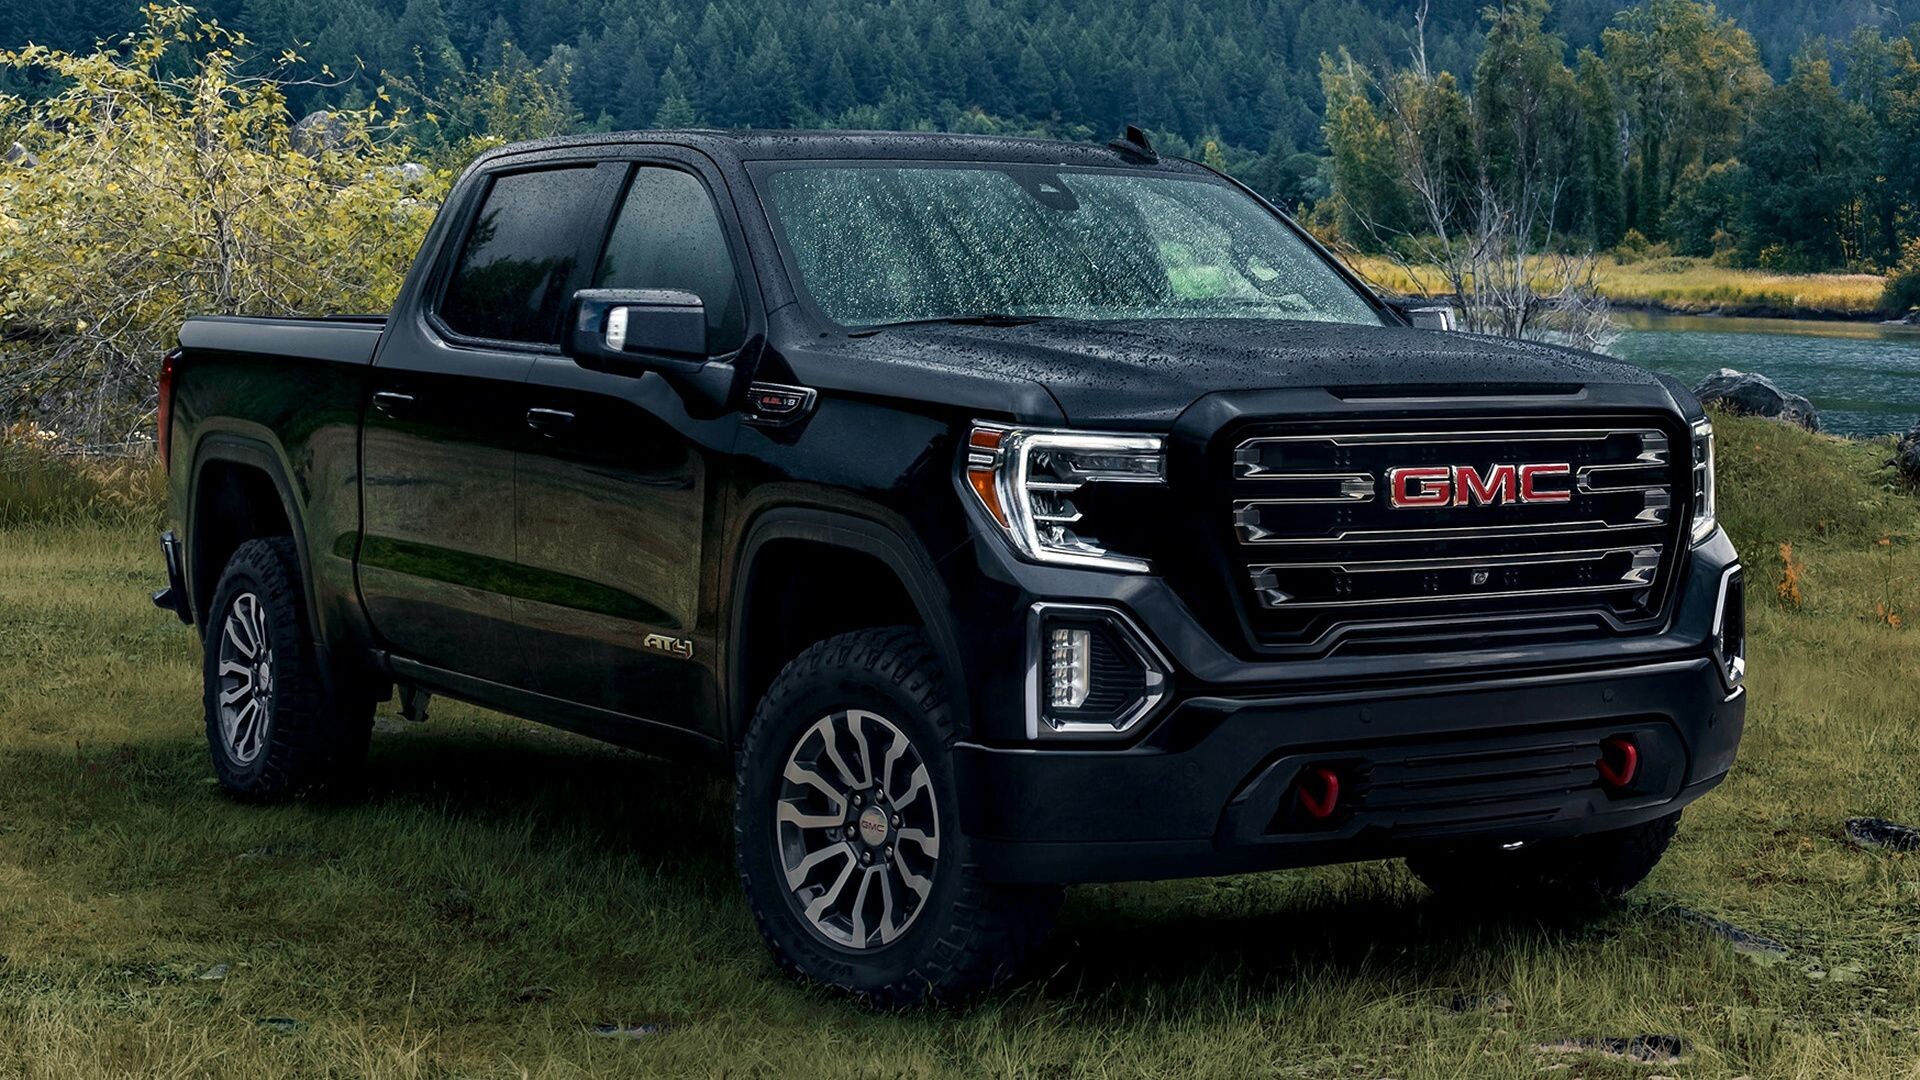 GMC: 2019 Sierra AT4, The power under the hood, A specific off-road chassis. 1920x1080 Full HD Background.